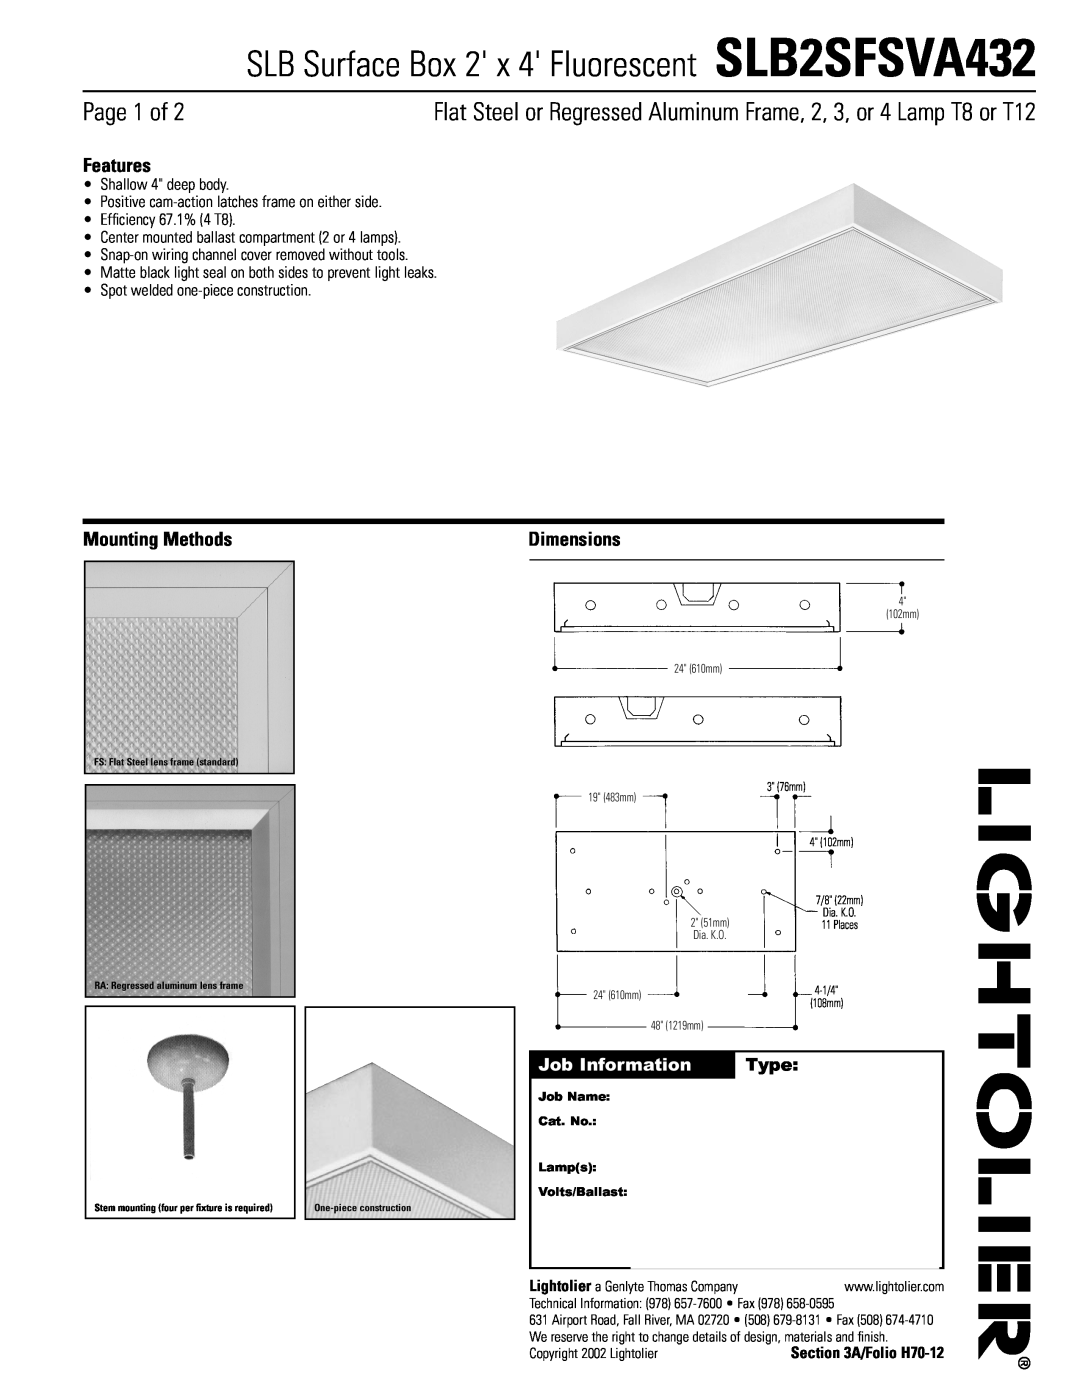 Lightolier dimensions SLB Surface Box 2 x 4 Fluorescent SLB2SFSVA432, Page 1 of, Features, Mounting Methods, Dimensions 